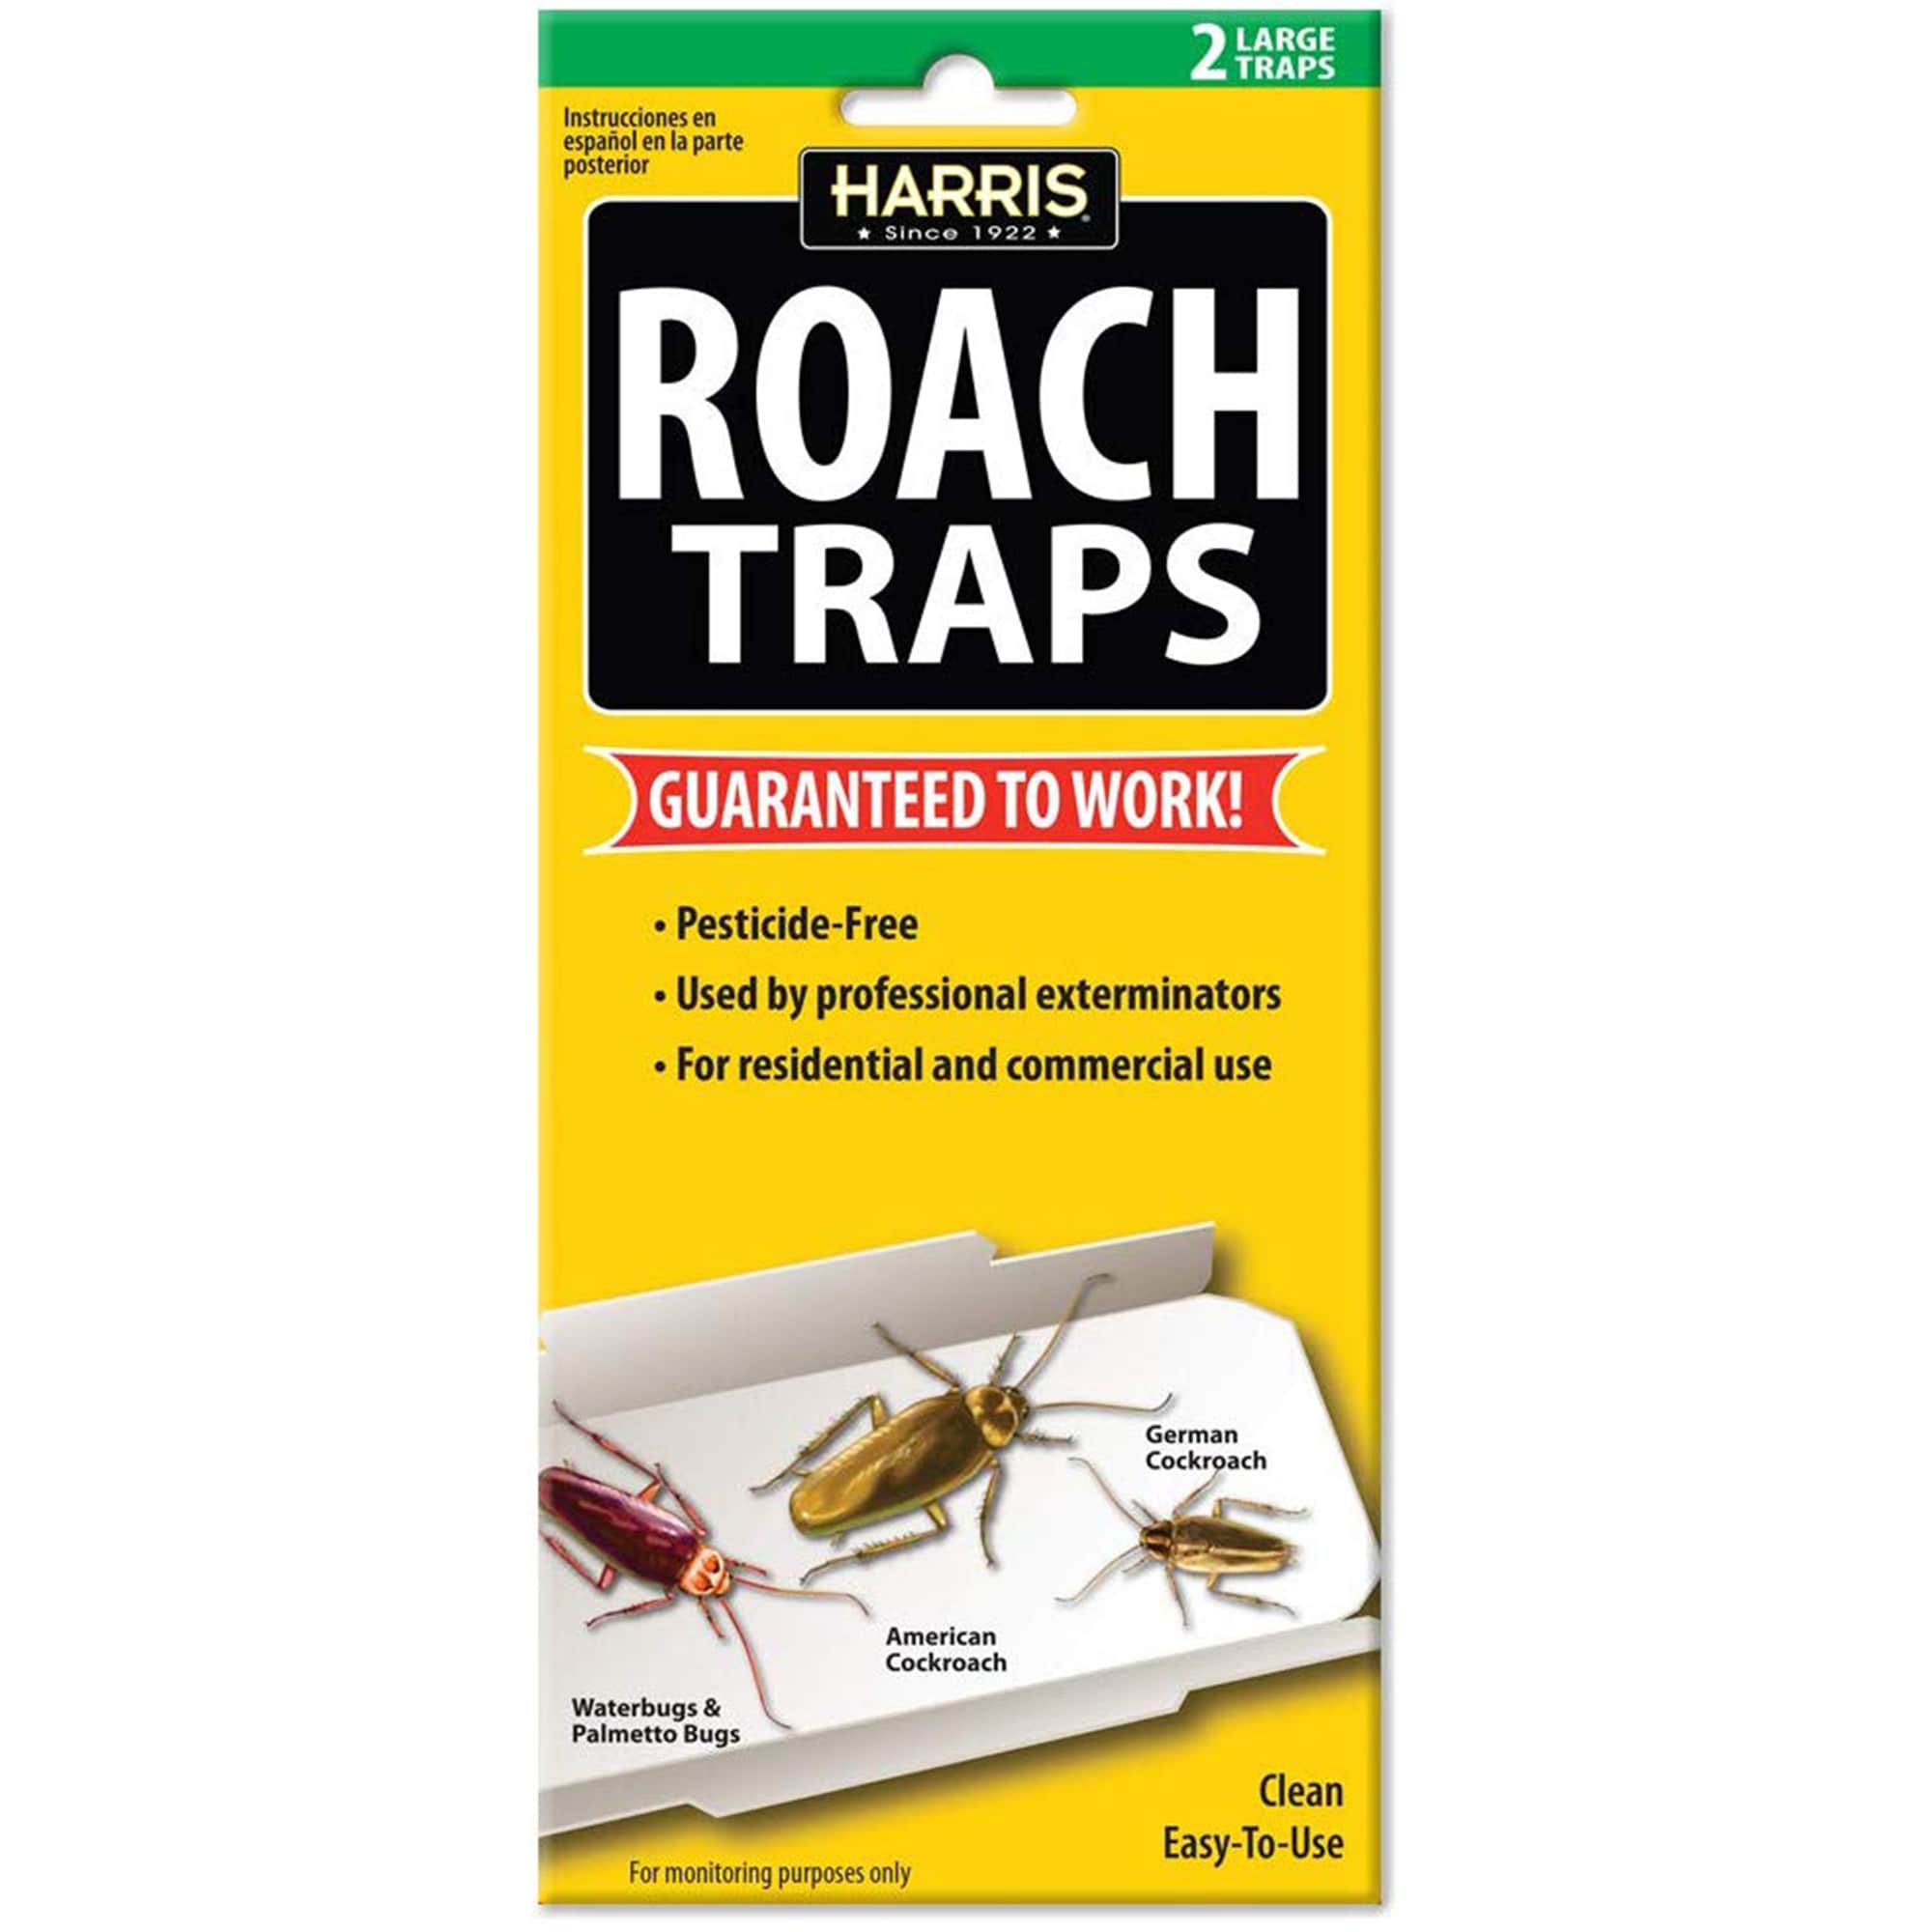 BLACK+DECKER Mouse Trap & Mouse Traps Indoor for Home- Insect Sticky Traps  for Mice, Small Rats, Flies, Cockroaches and Other Bugs, Odorless Pest